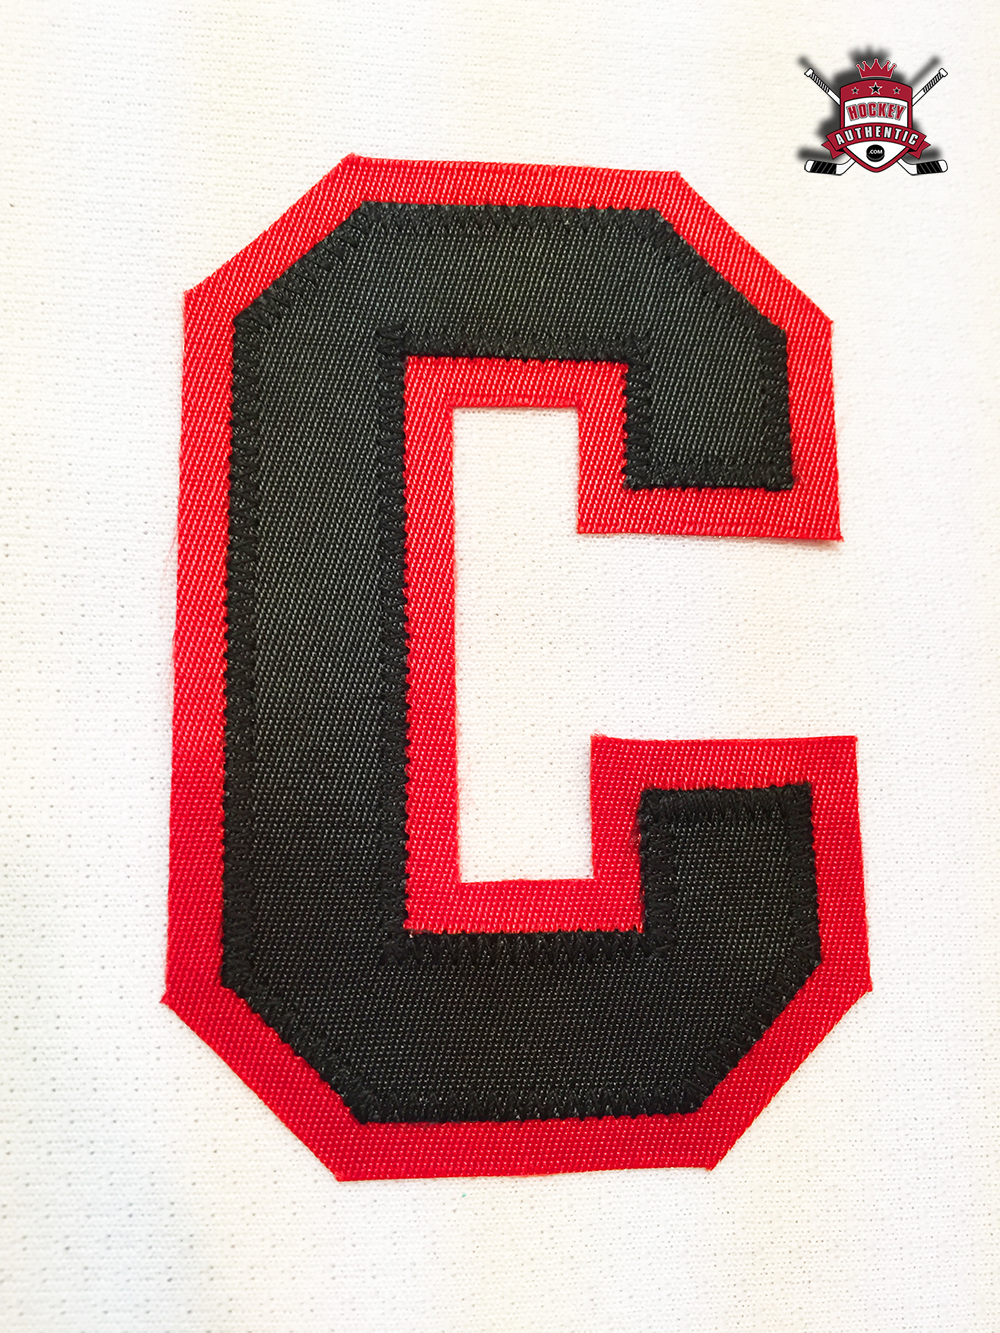 OFFICIAL PATCH FOR CHICAGO BLACKHAWKS 